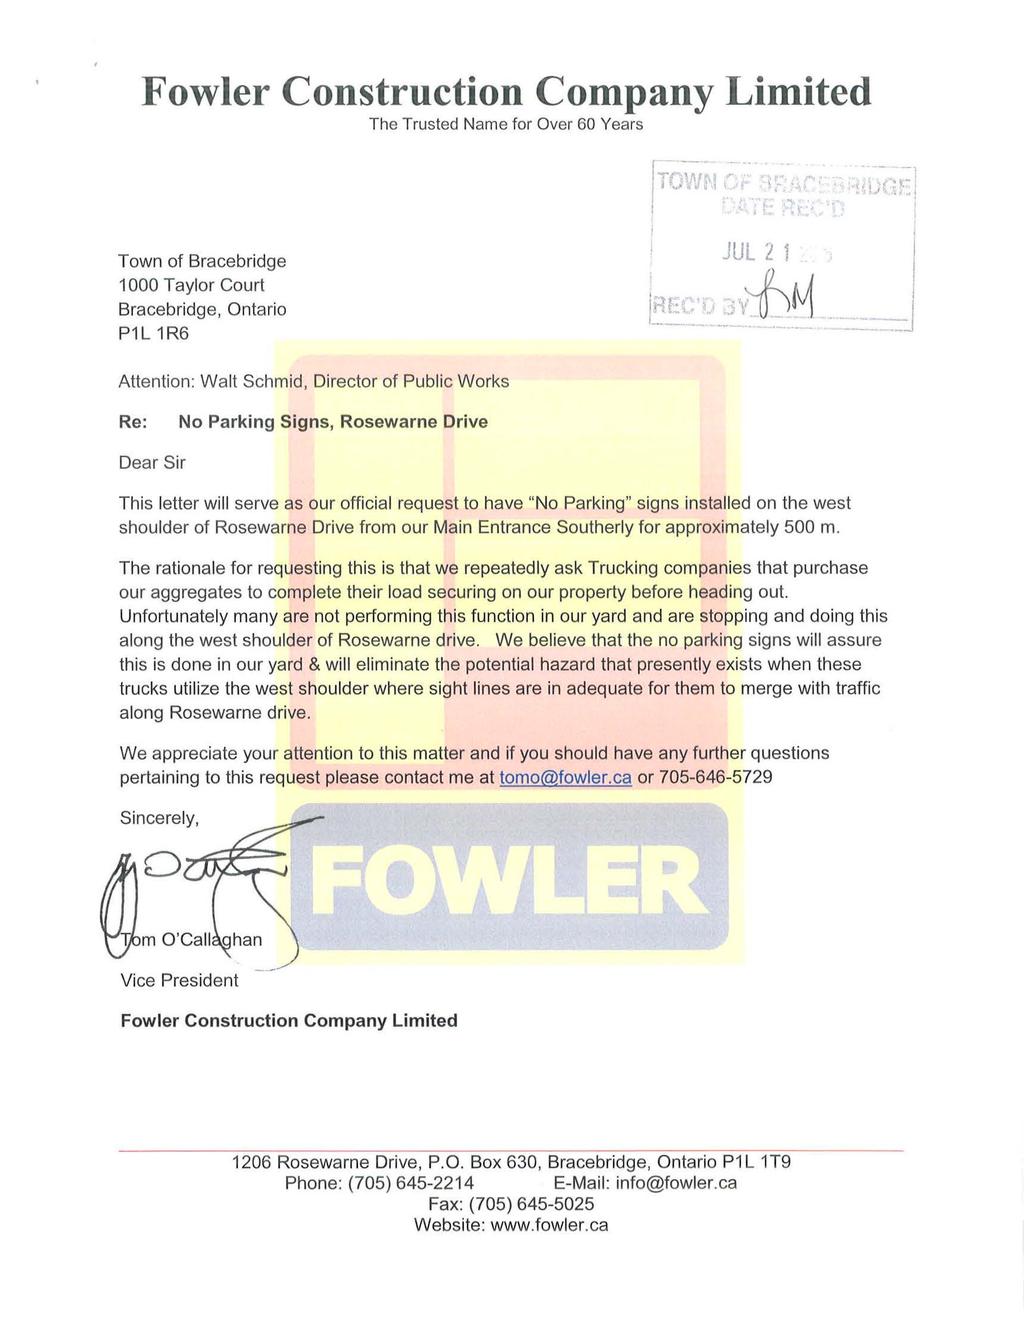 Fowler Construction Company Limited The Trusted Name for Over 60 Years Town of Bracebridge 1000 Taylor Court Bracebridge, Ontario P1 L 1 R6 JUL 'L 1 J,~ M - --1 Attention: Walt Schmid, Director of